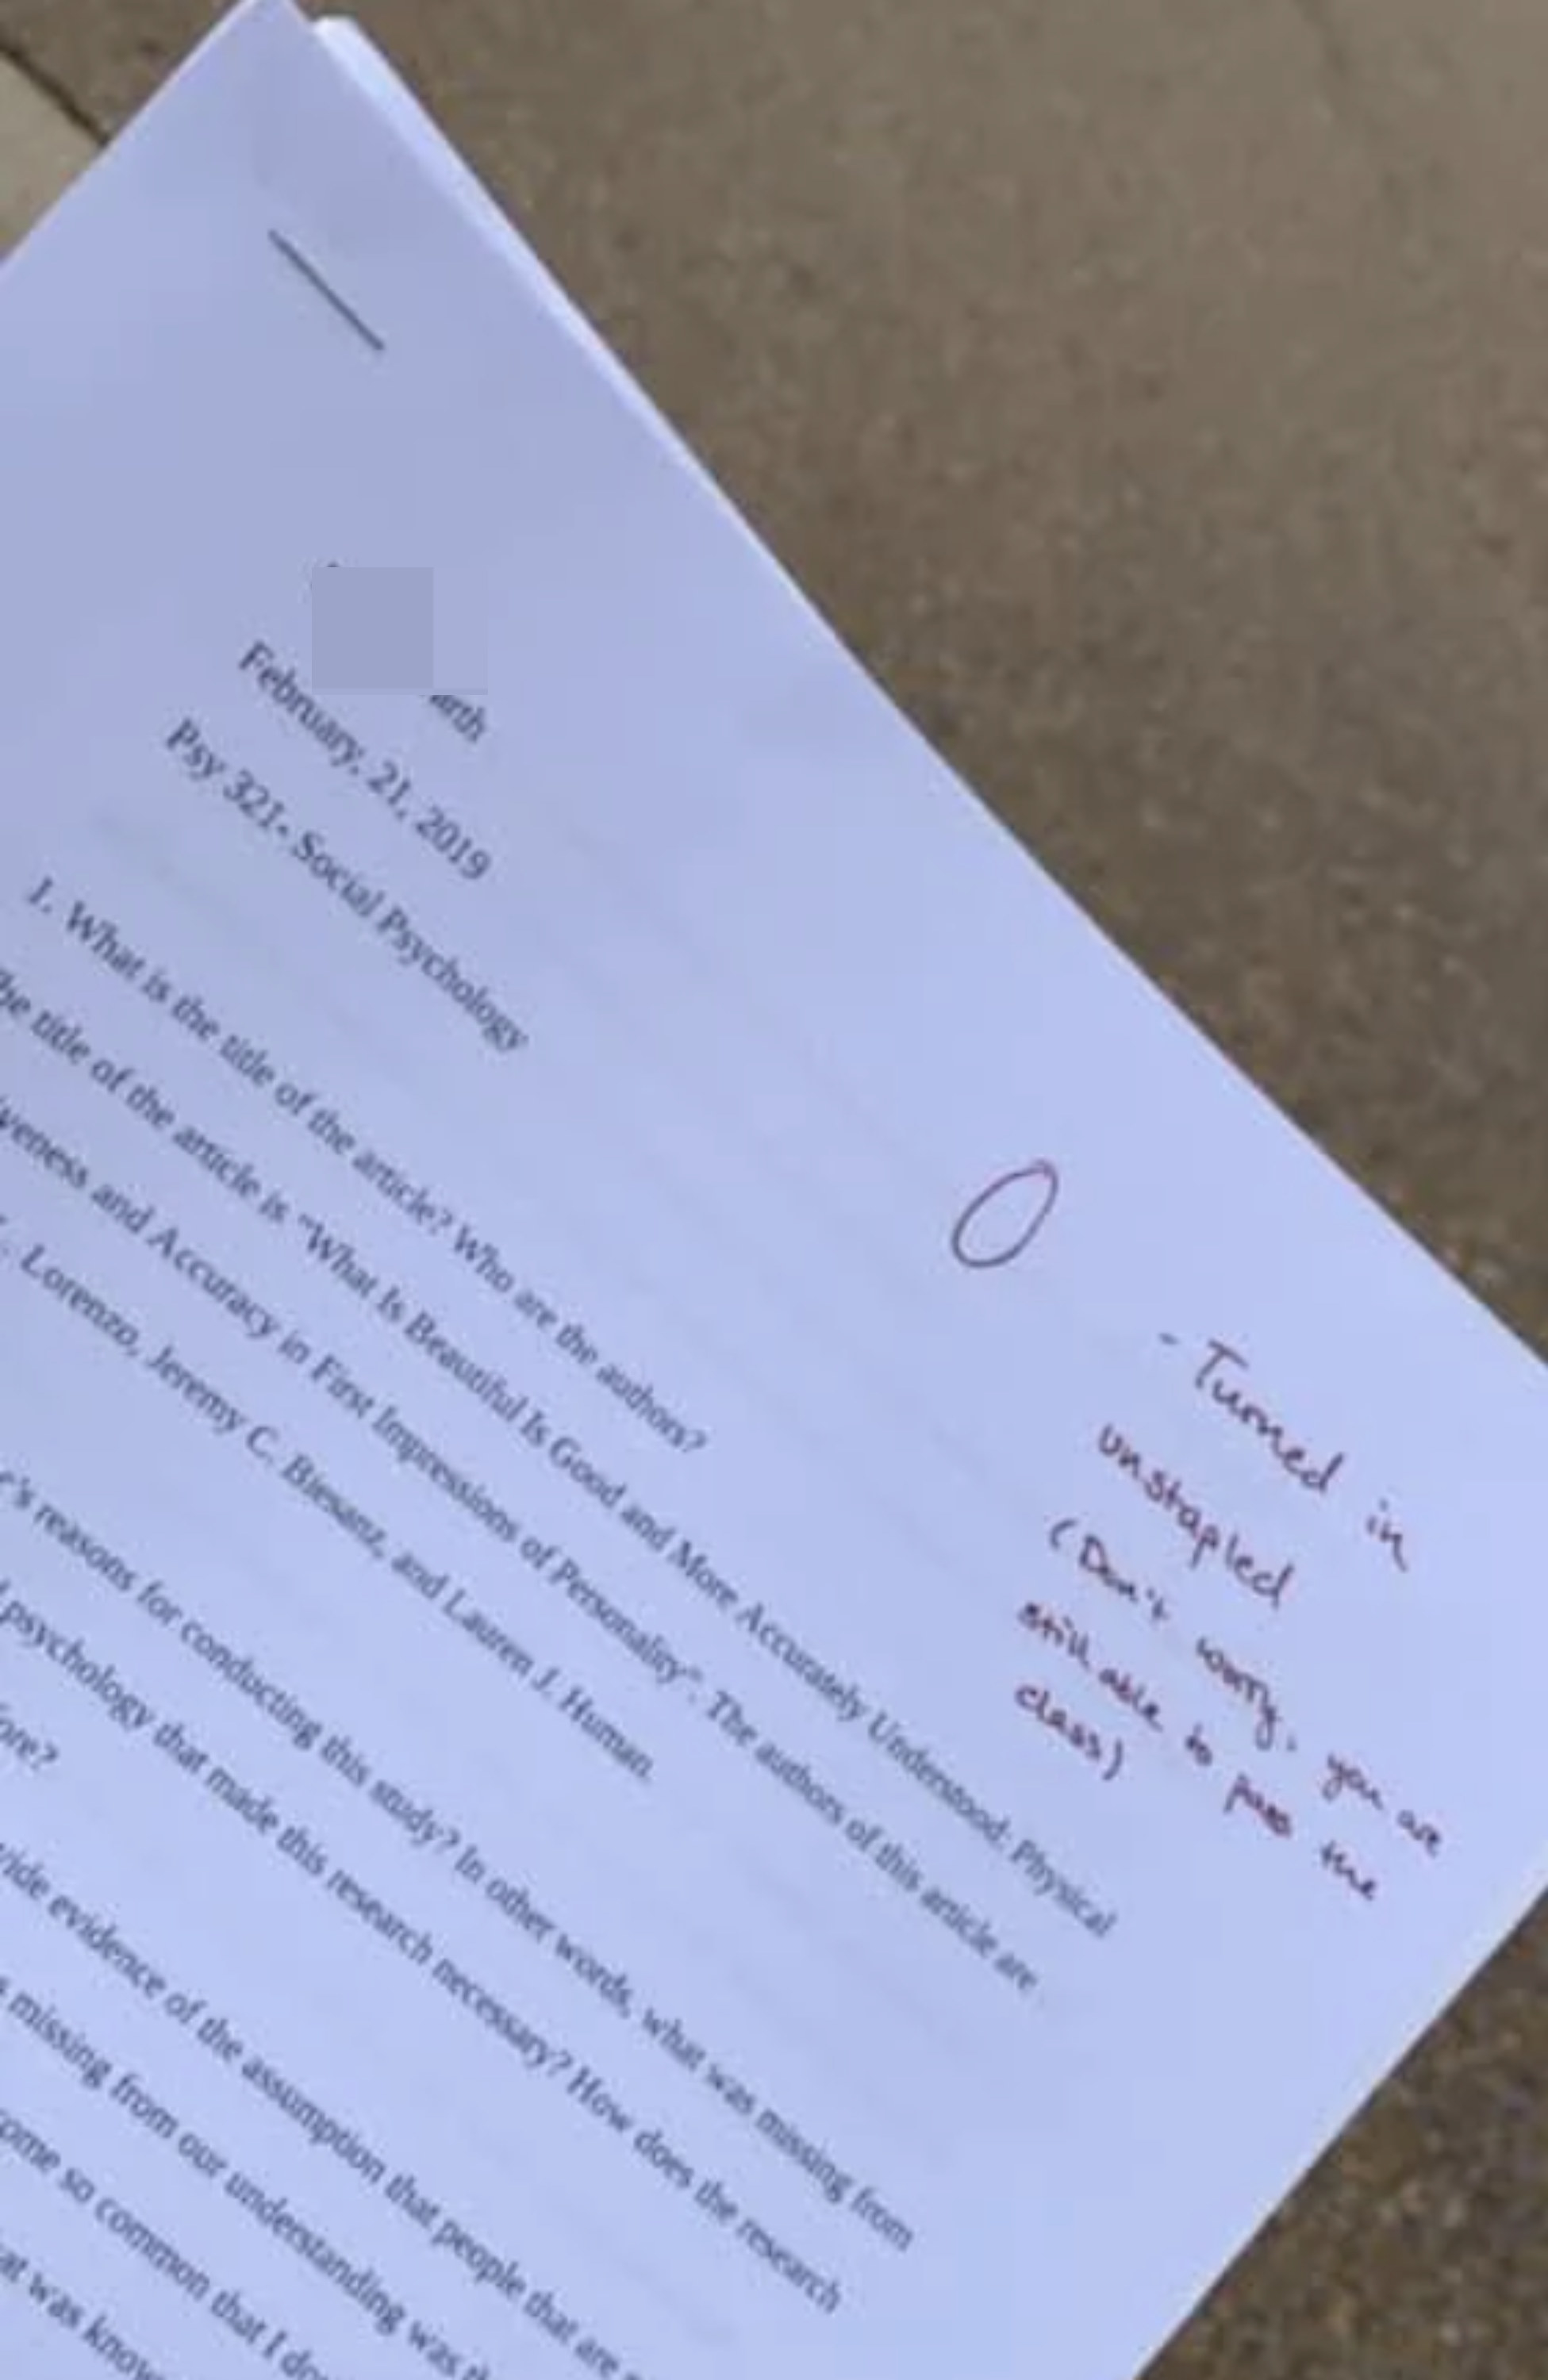 A 0 on a paper for it not being stapled